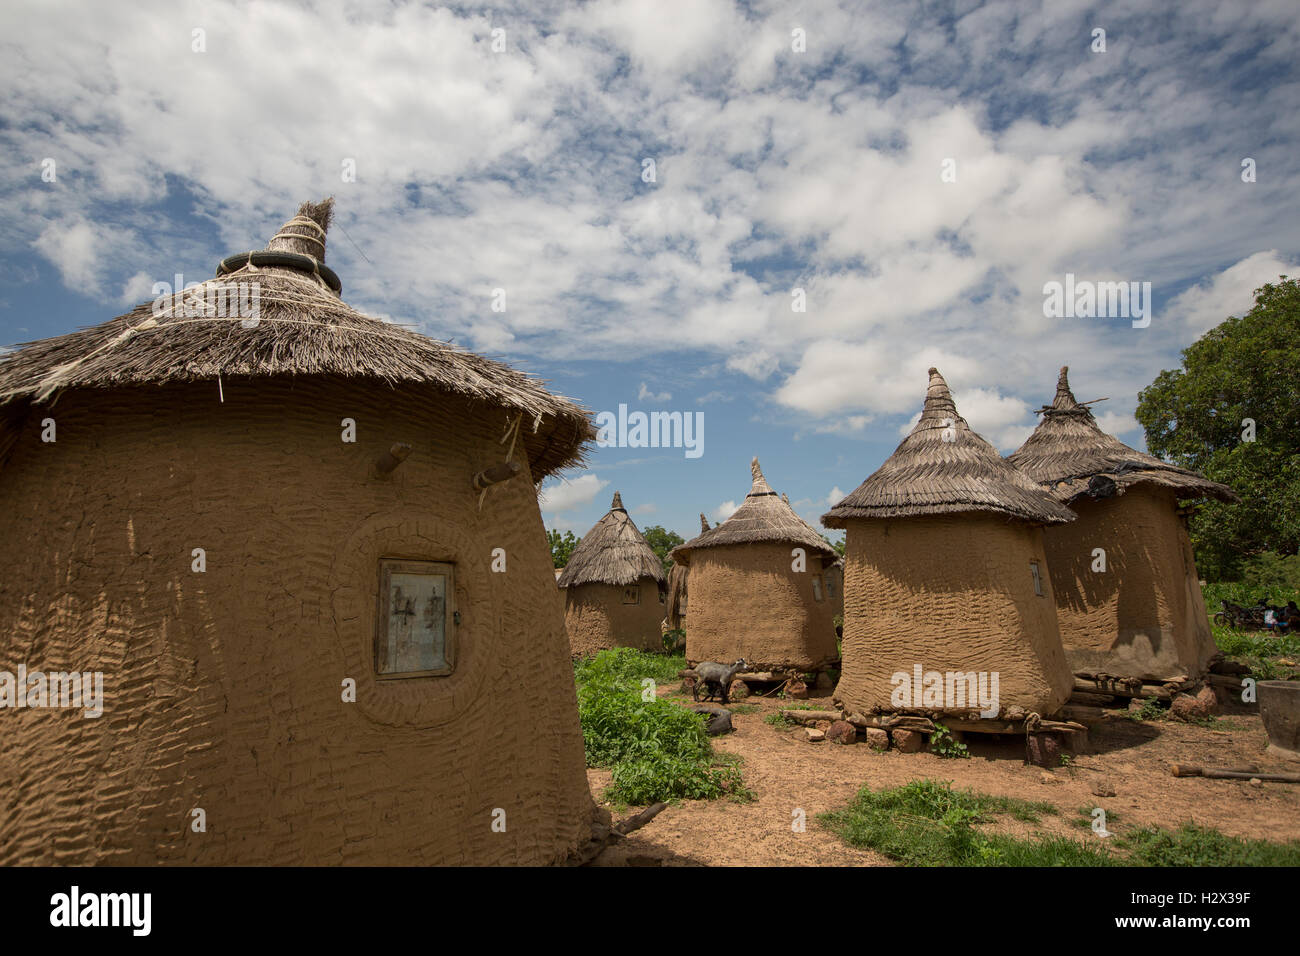 Traditional mud and grass houses in Réo, Burkina Faso, West Africa. Stock Photo